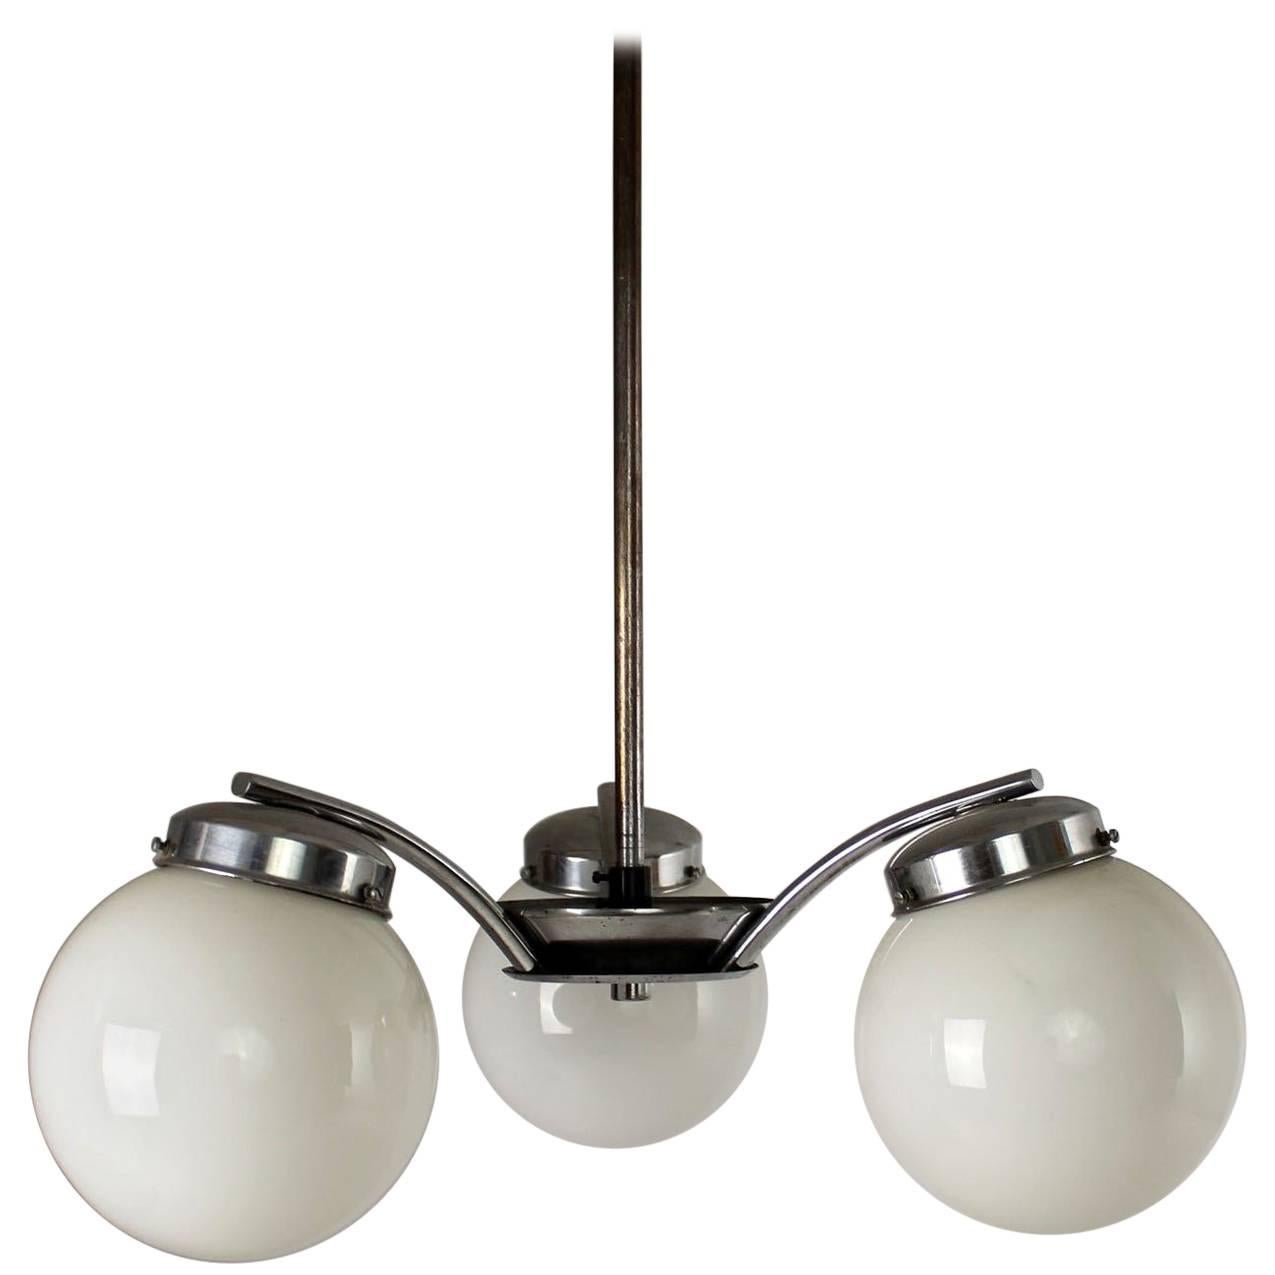 Czech Art Deco Chromed Metal and Glass Pendant Lamp from Napako